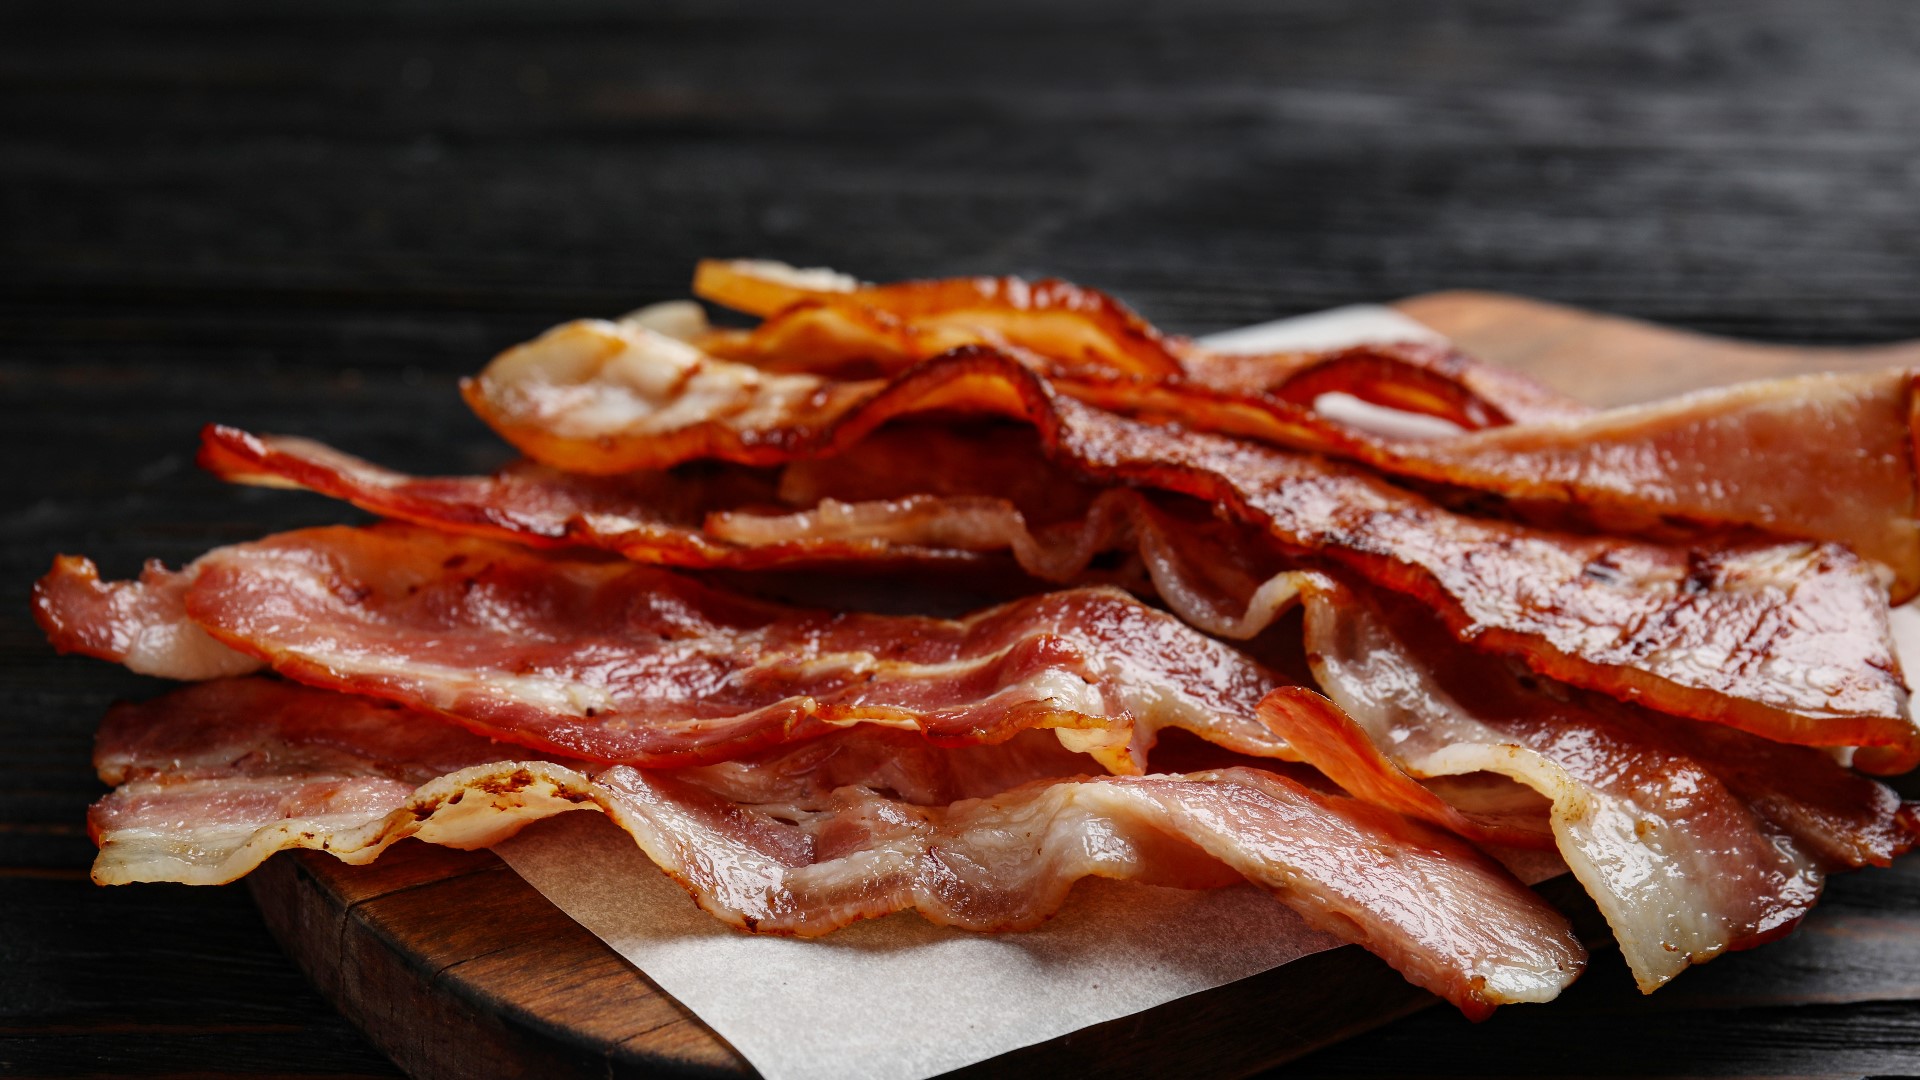 Smithfield Foods has recalled several bacon topping products due to possibly being contaminated with metal, according to the U.S. Department of Agriculture (USDA).